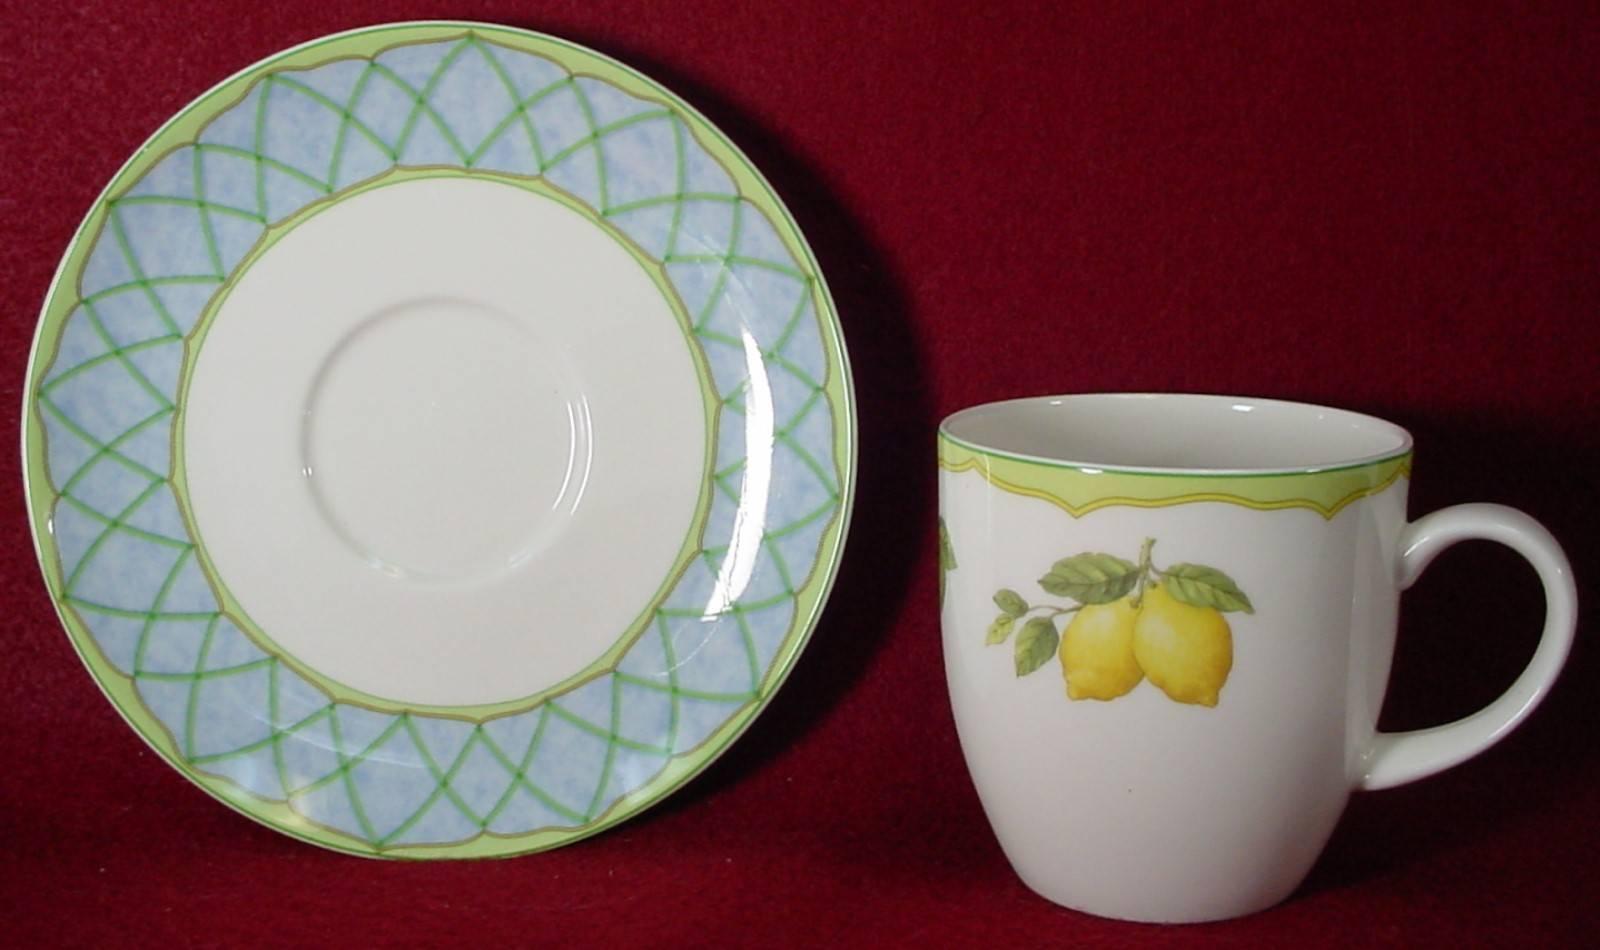 
Mikasa china fruit rapture pattern 40-piece set service for eight

in great condition with mild use.

Production dates: 2000-2007.

Includes eight (8) each of cups, saucers, dinner plates, salad plates and soup or salad bowls.

Optima